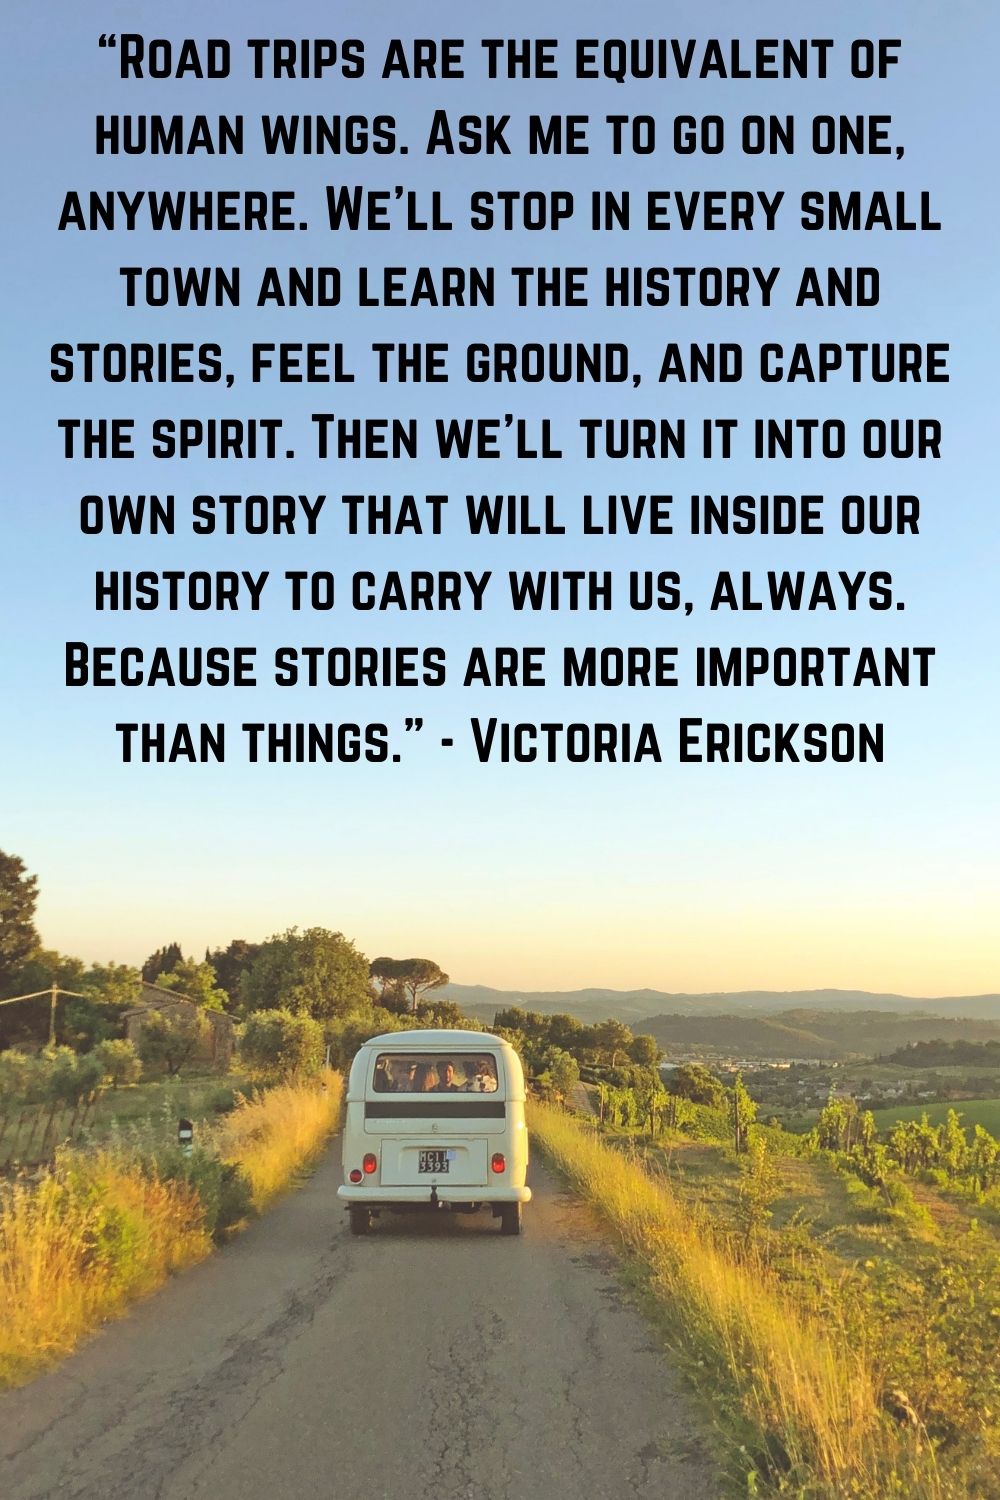 78 Road Trip Quotes Captions To Inspire Your Next Adventure 21